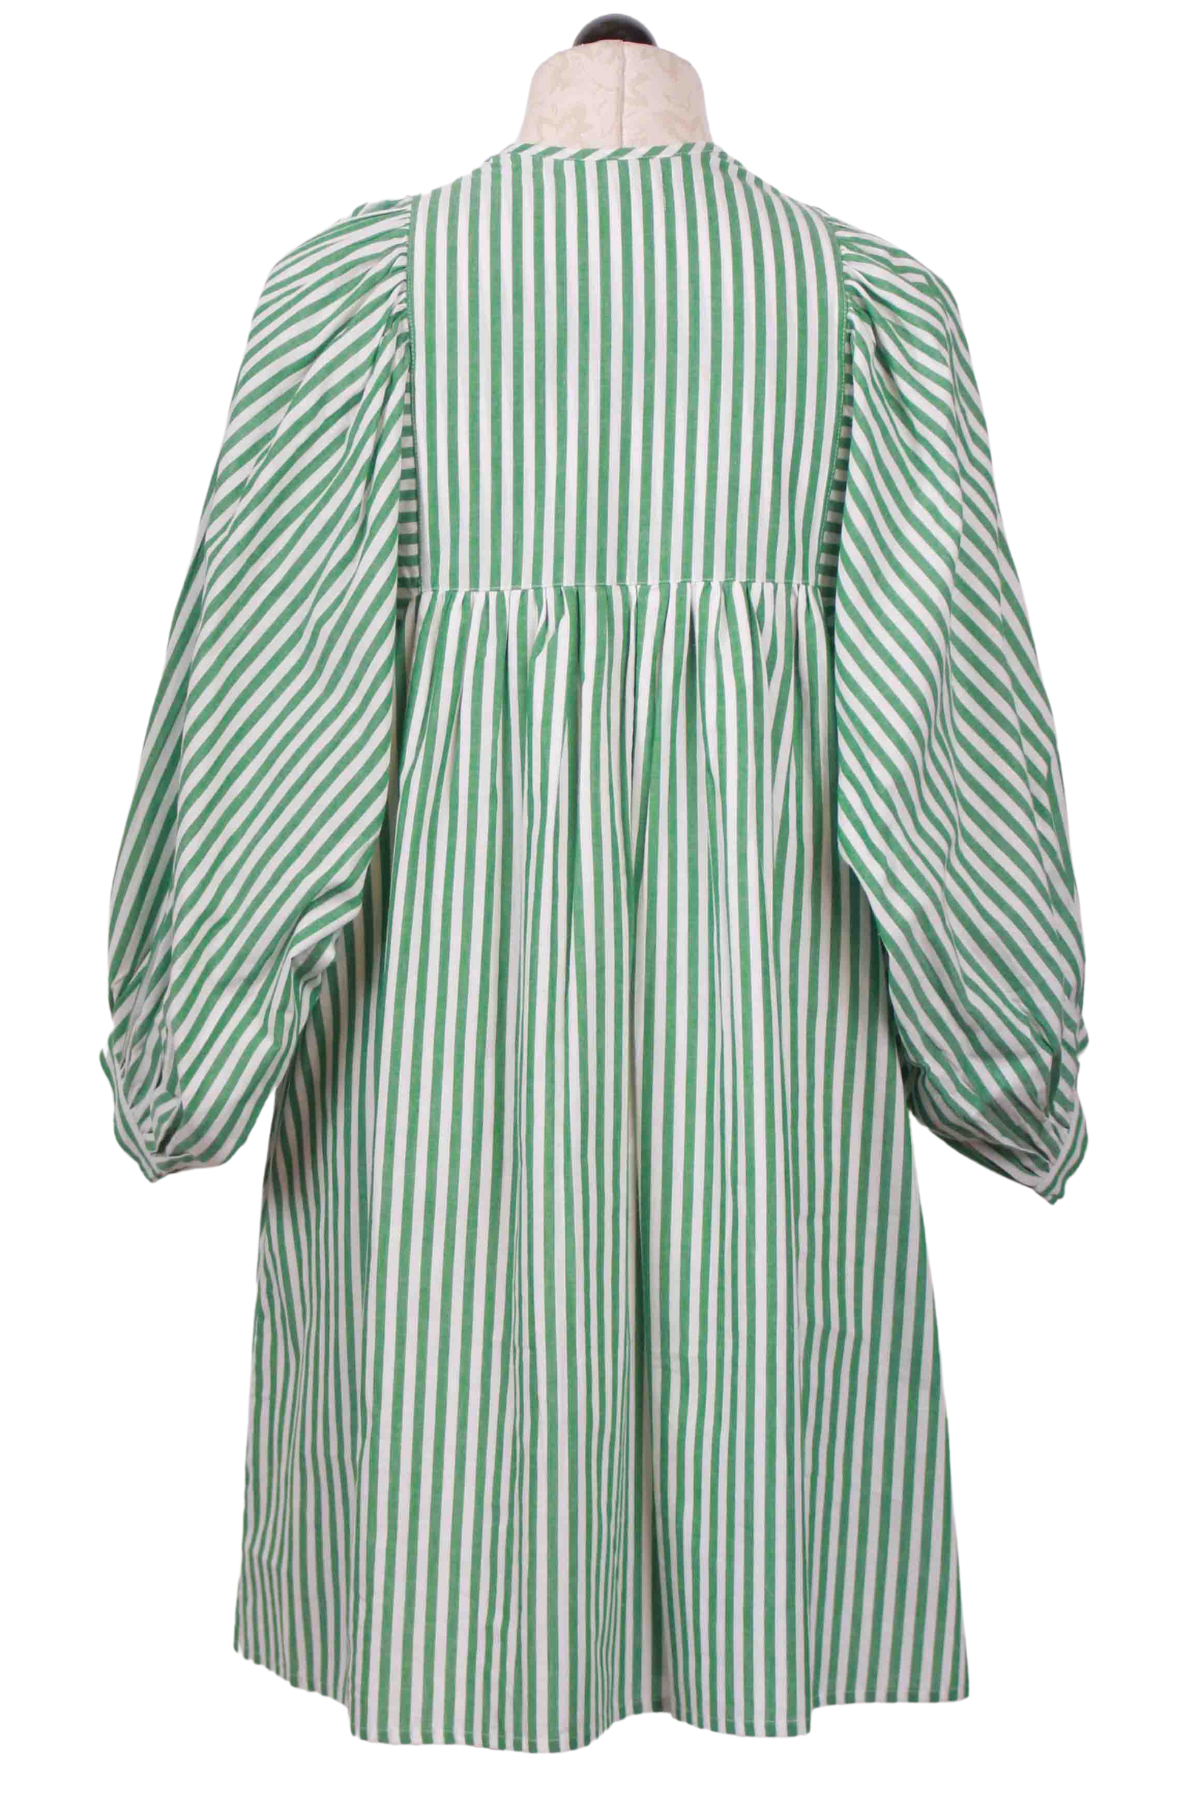 back view of Kelly Green and White Striped Daisy Dress by Mille